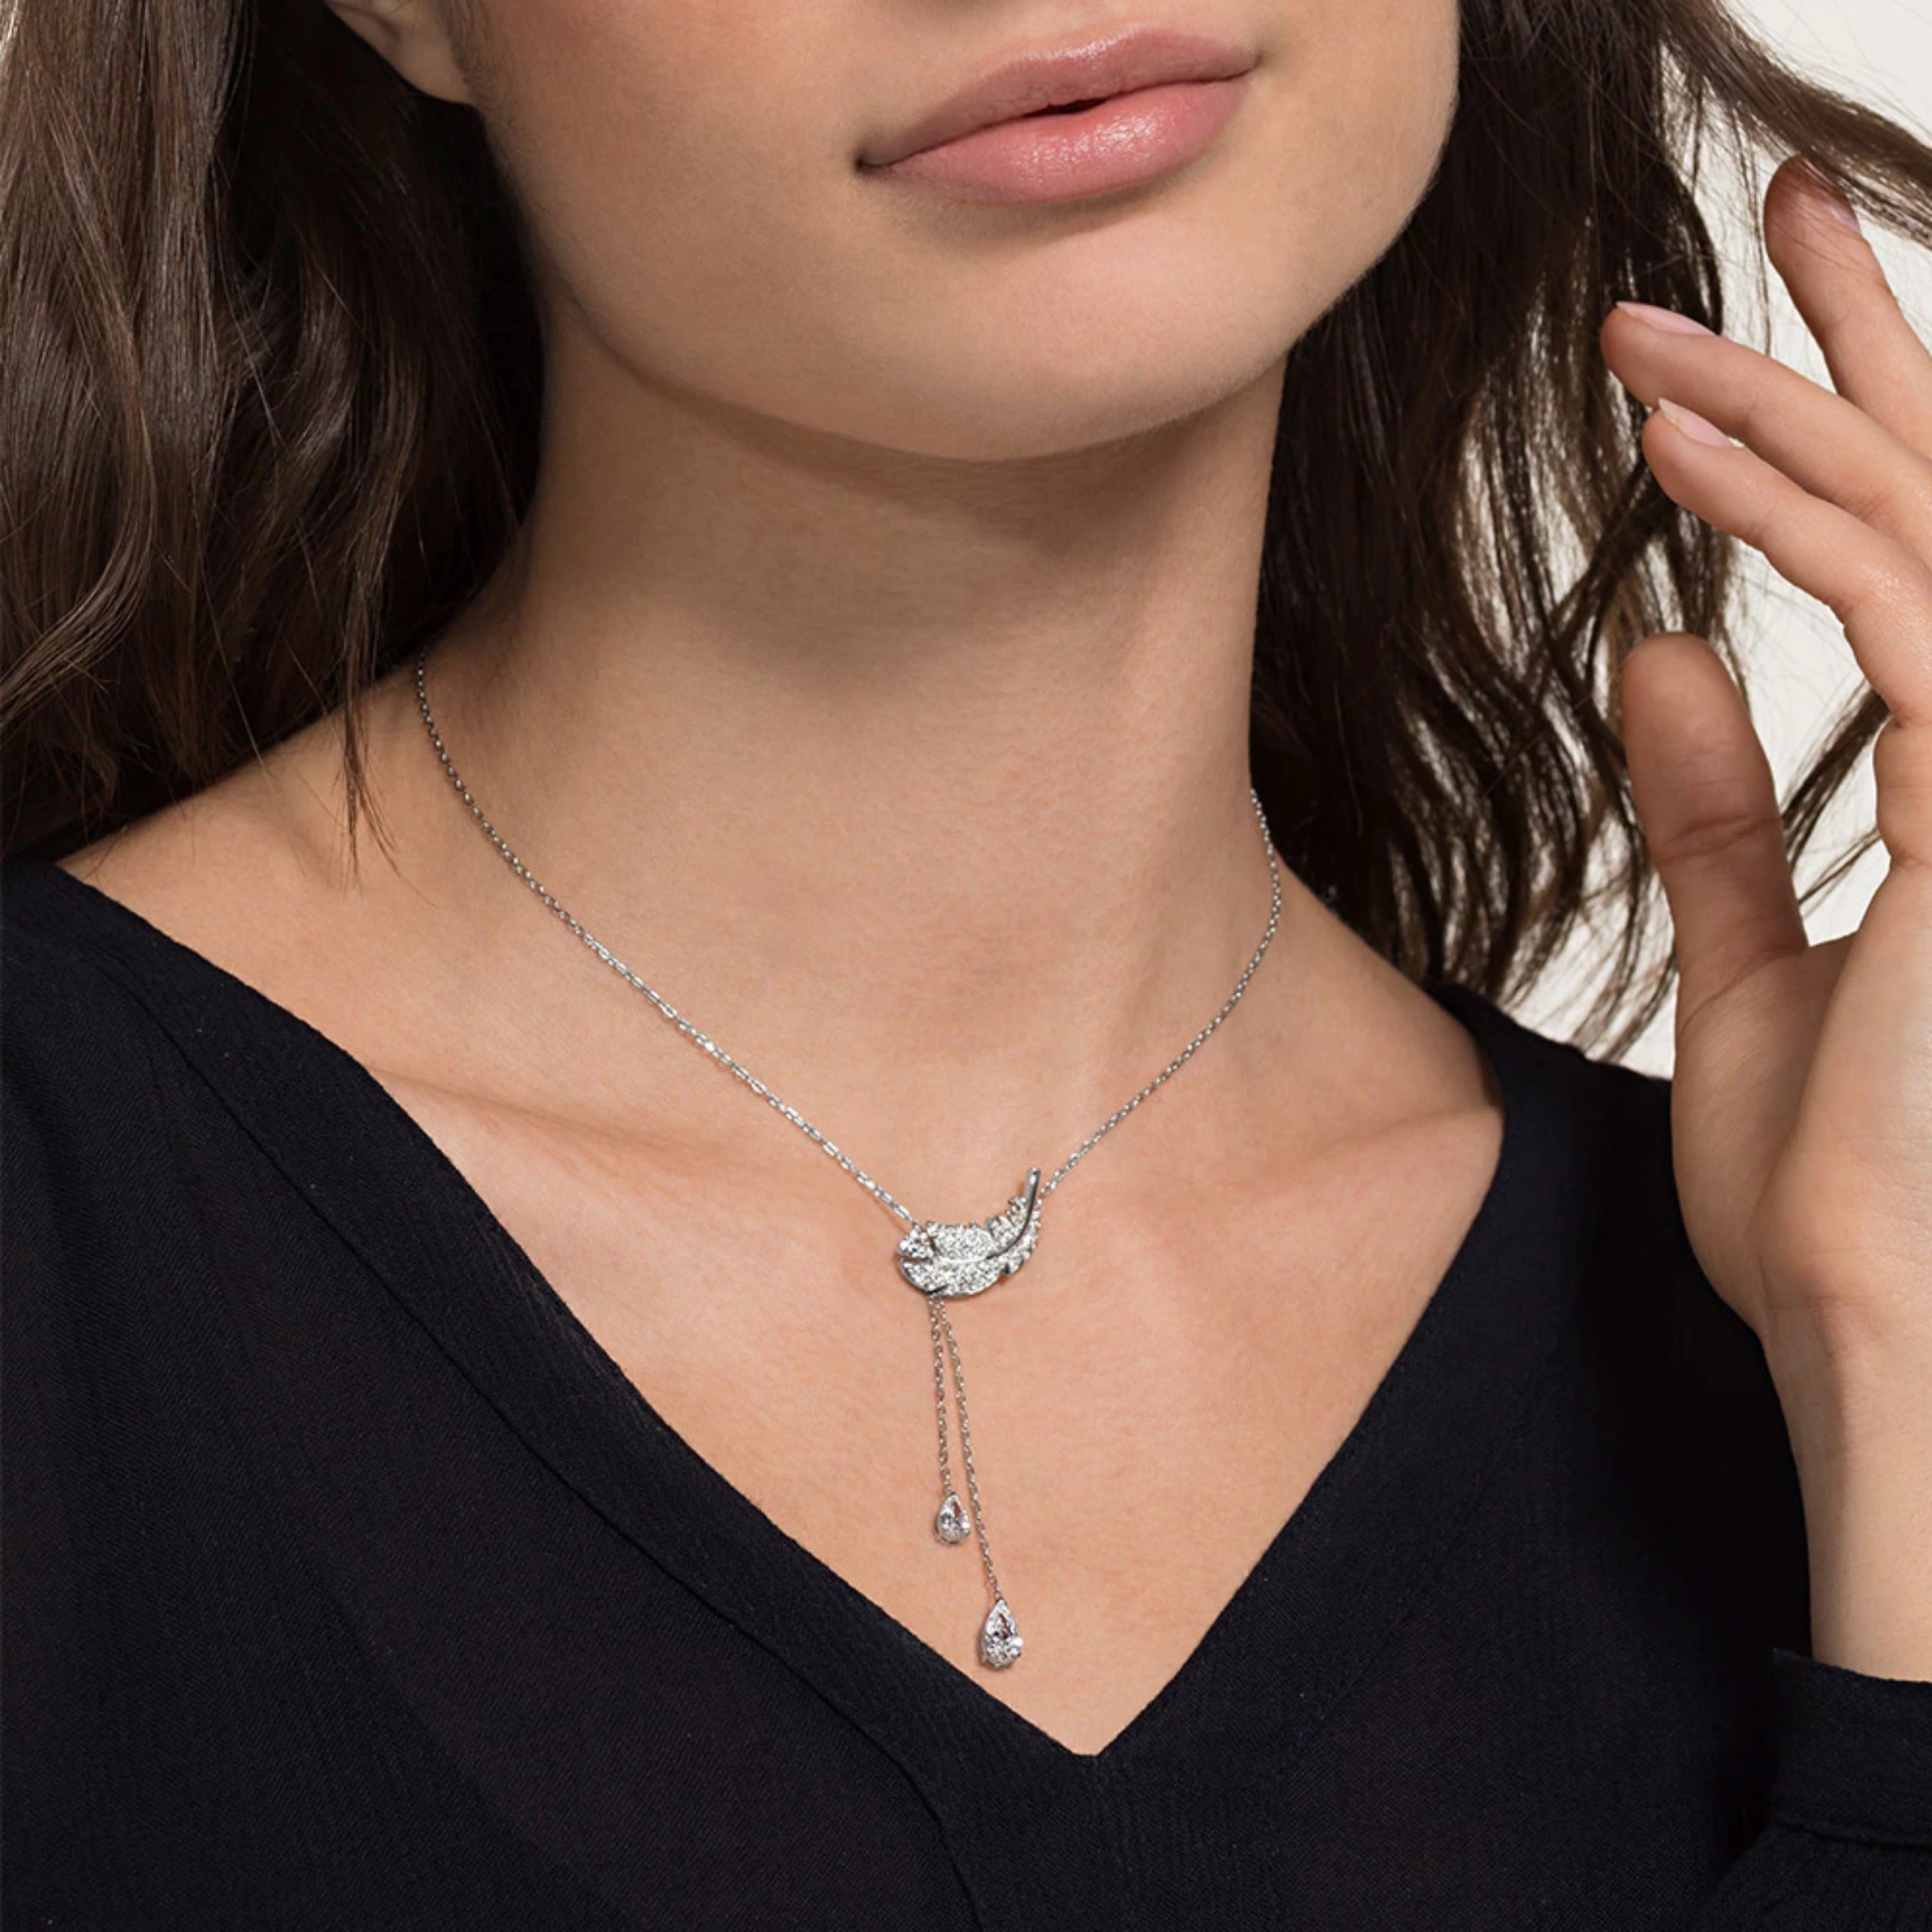 DÂY CHUYỀN SWAROVSKI LÔNG NGỖNG NICE Y NECKLACE WHITE RHODIUM PLATED 5493397 3